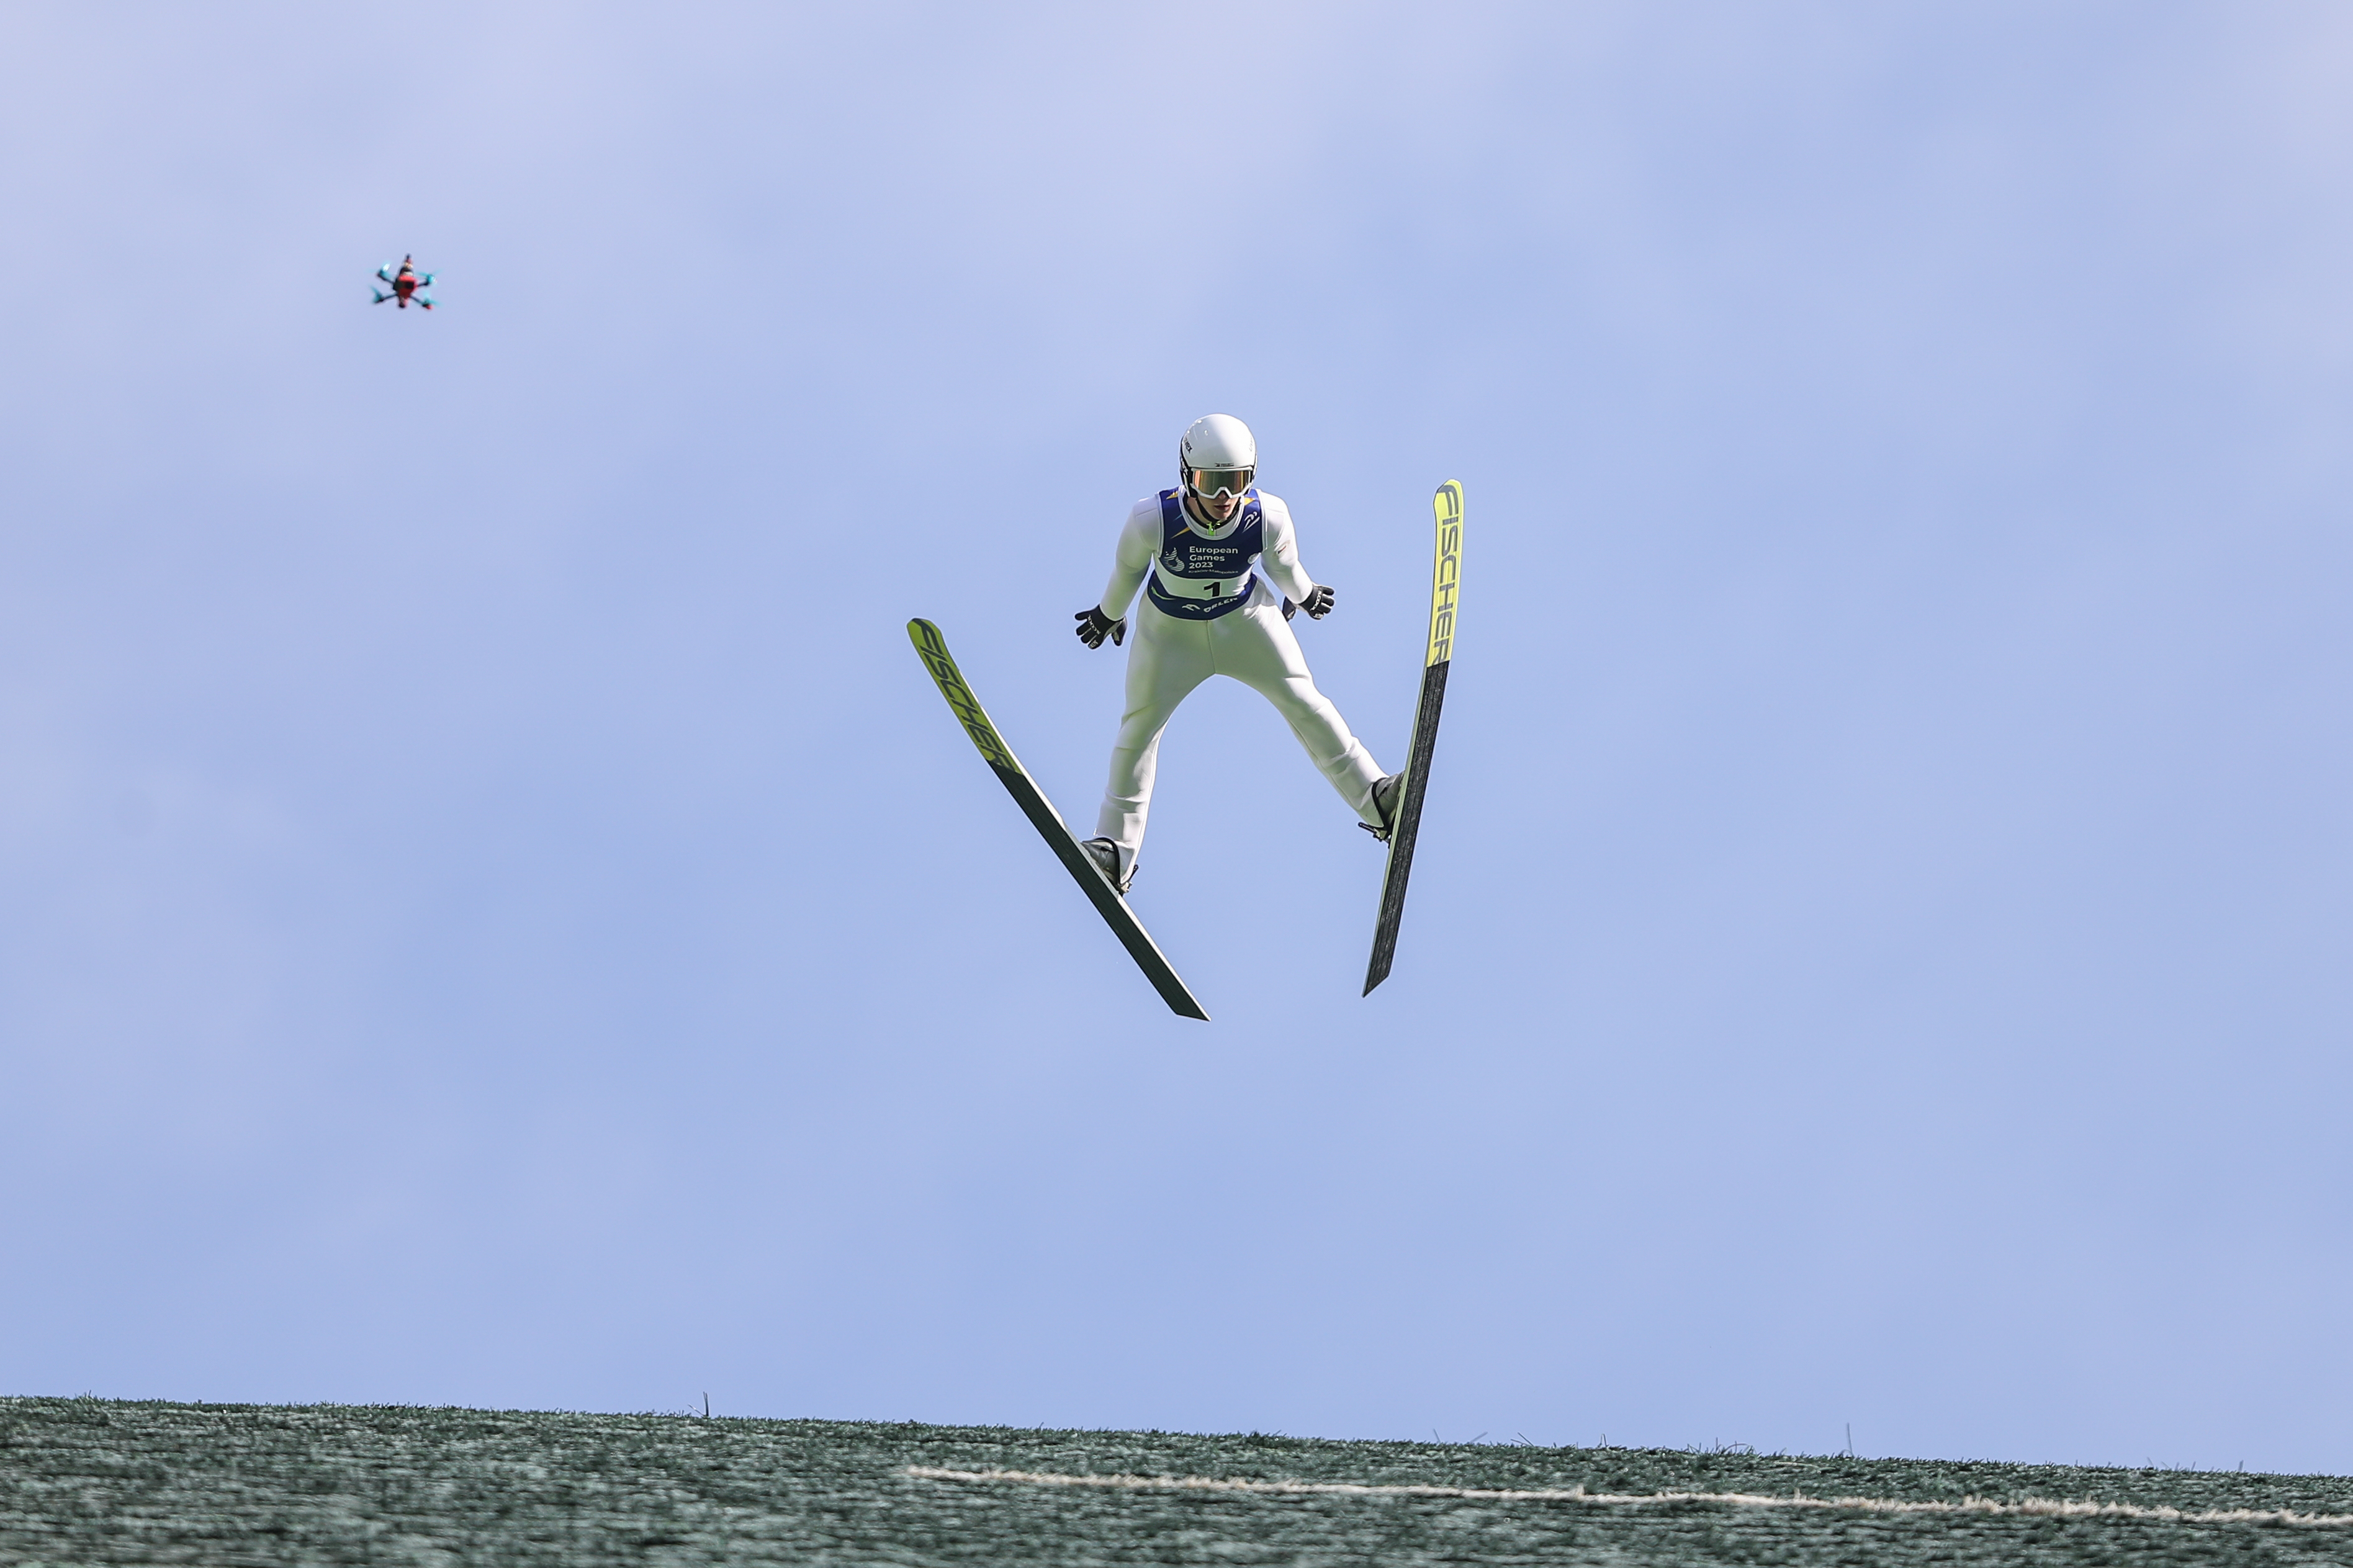 Ski jumping: the grand finale of several days of competition